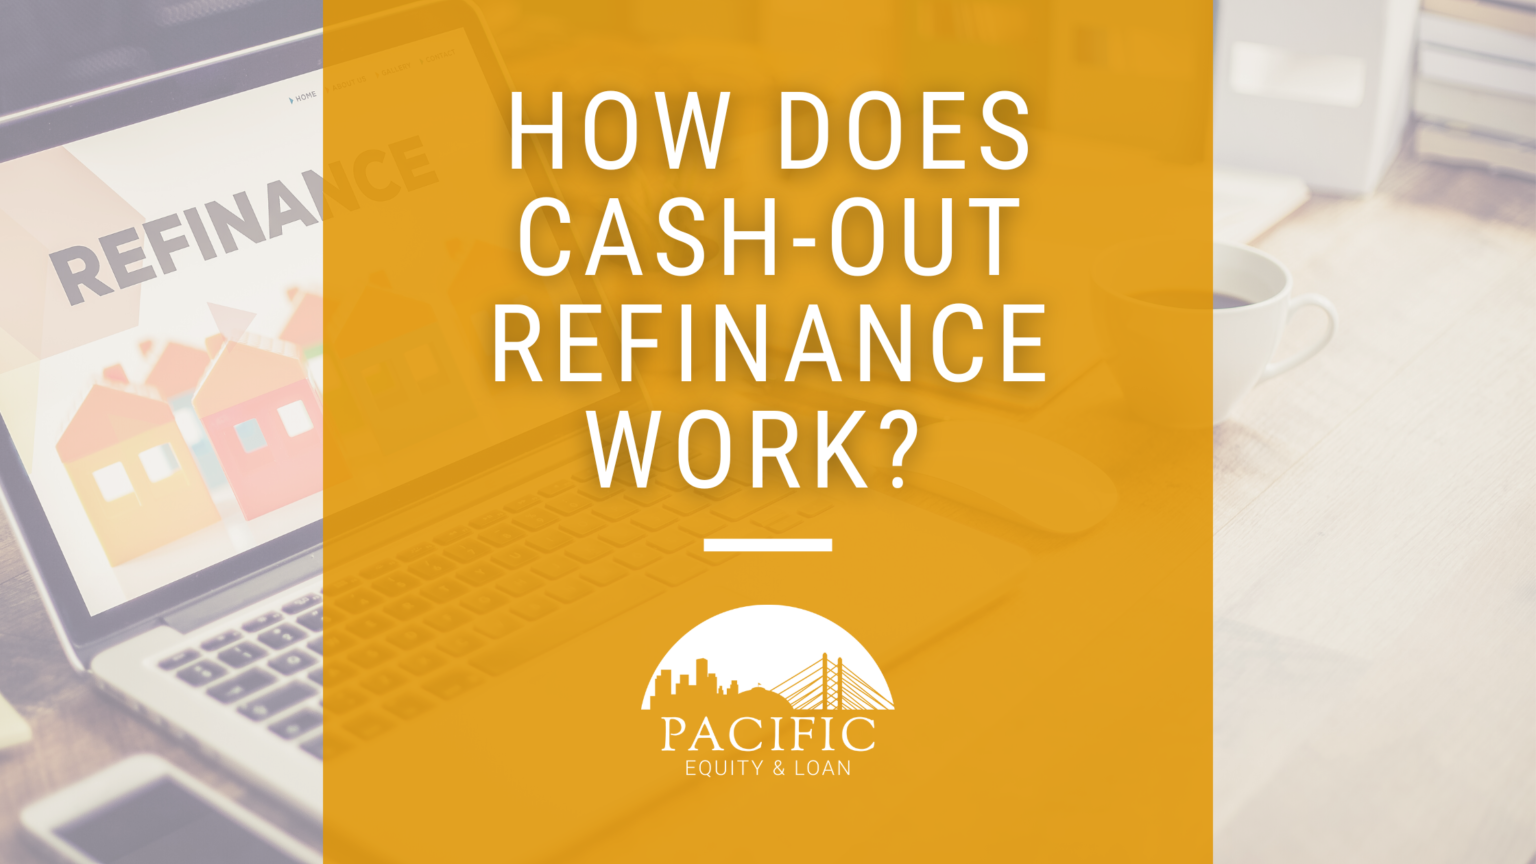 How Does CashOut Refinance Work? Pacific Equity & Loan